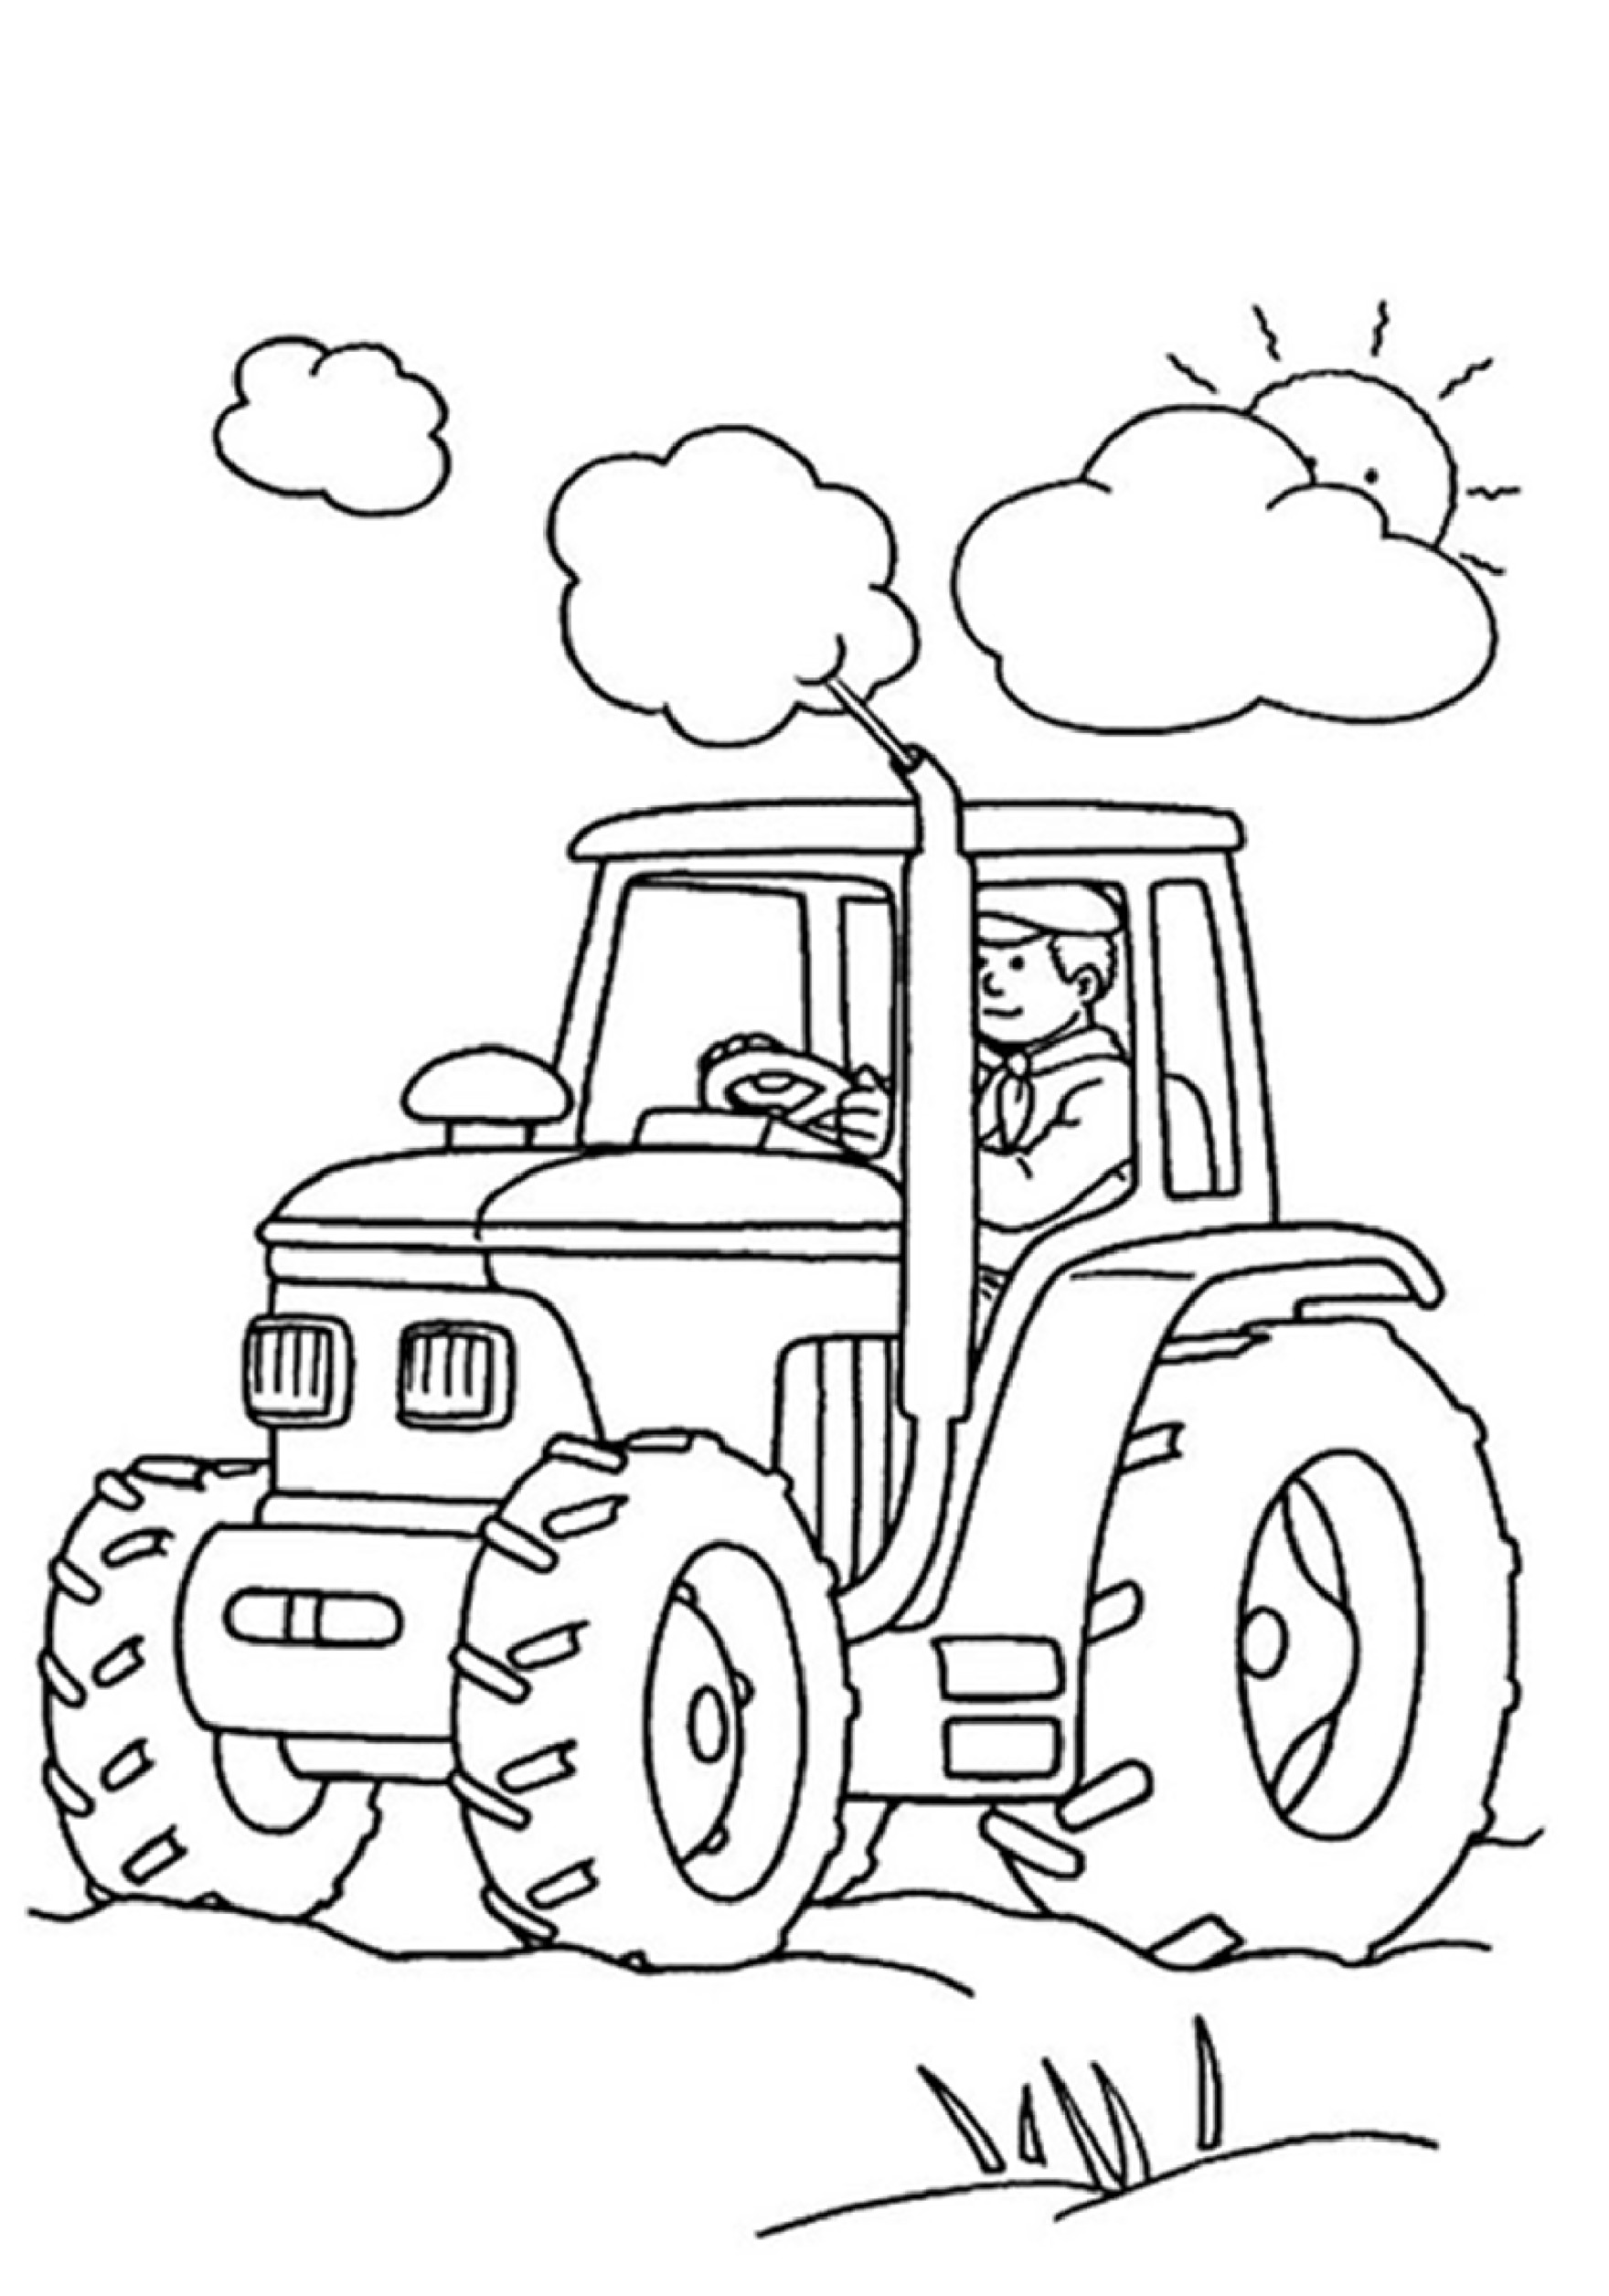 Coloring Pages Kidsboys.Com
 Coloring pages for boys